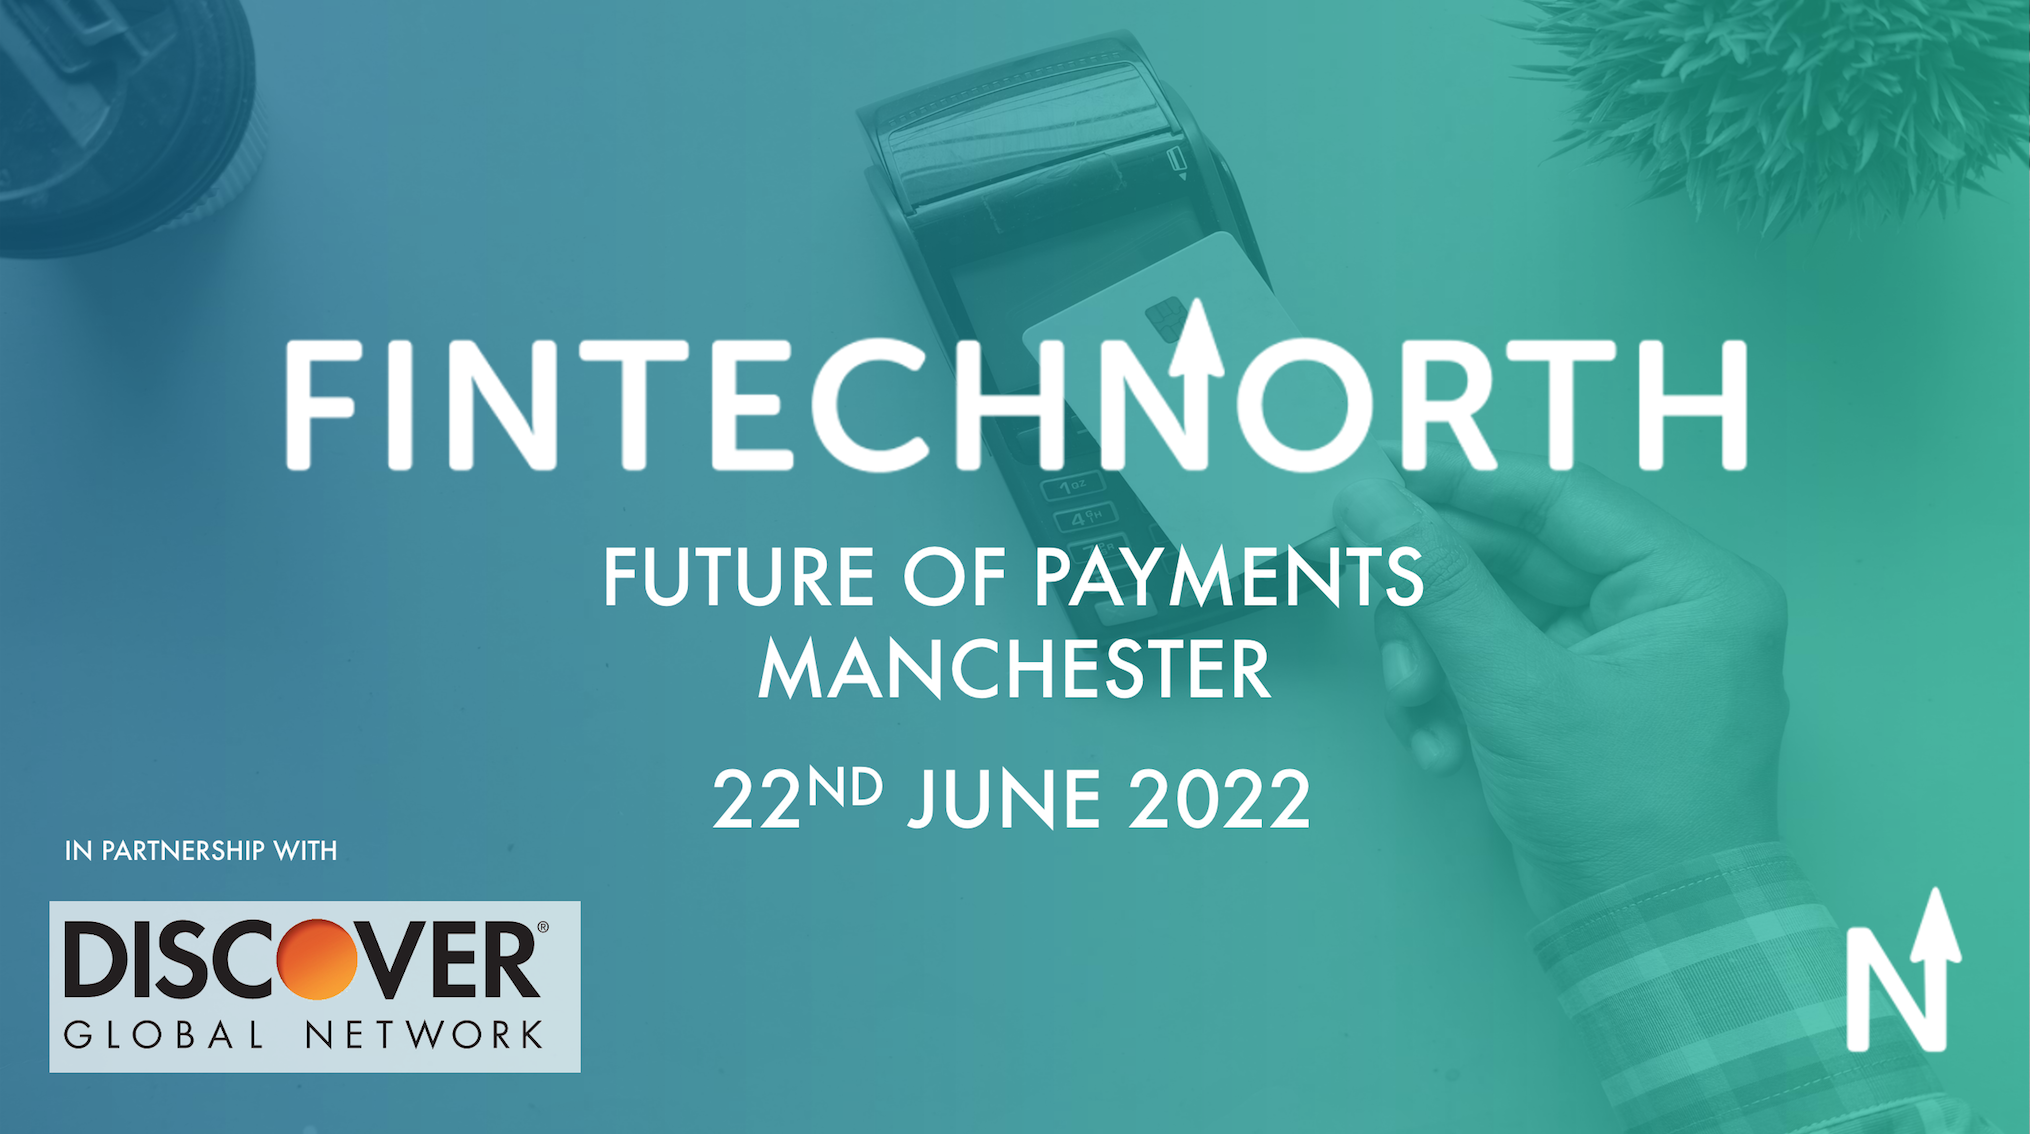 FinTech North Future of Payments 2022: Re-Cap and Re-Watch